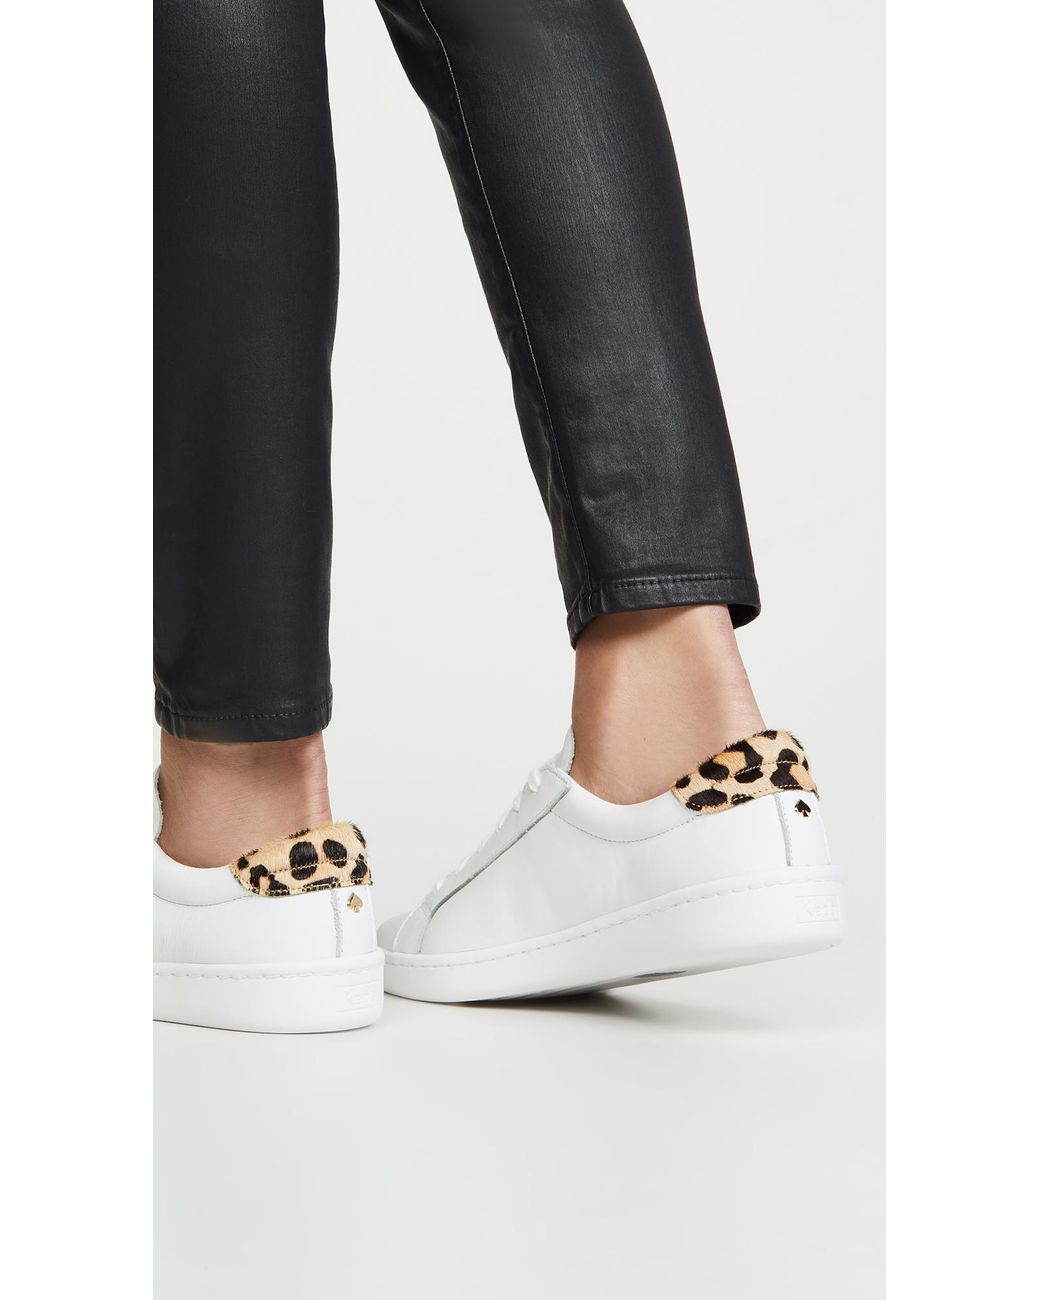 Keds X Kate Spade Ace Sneakers in White | Lyst